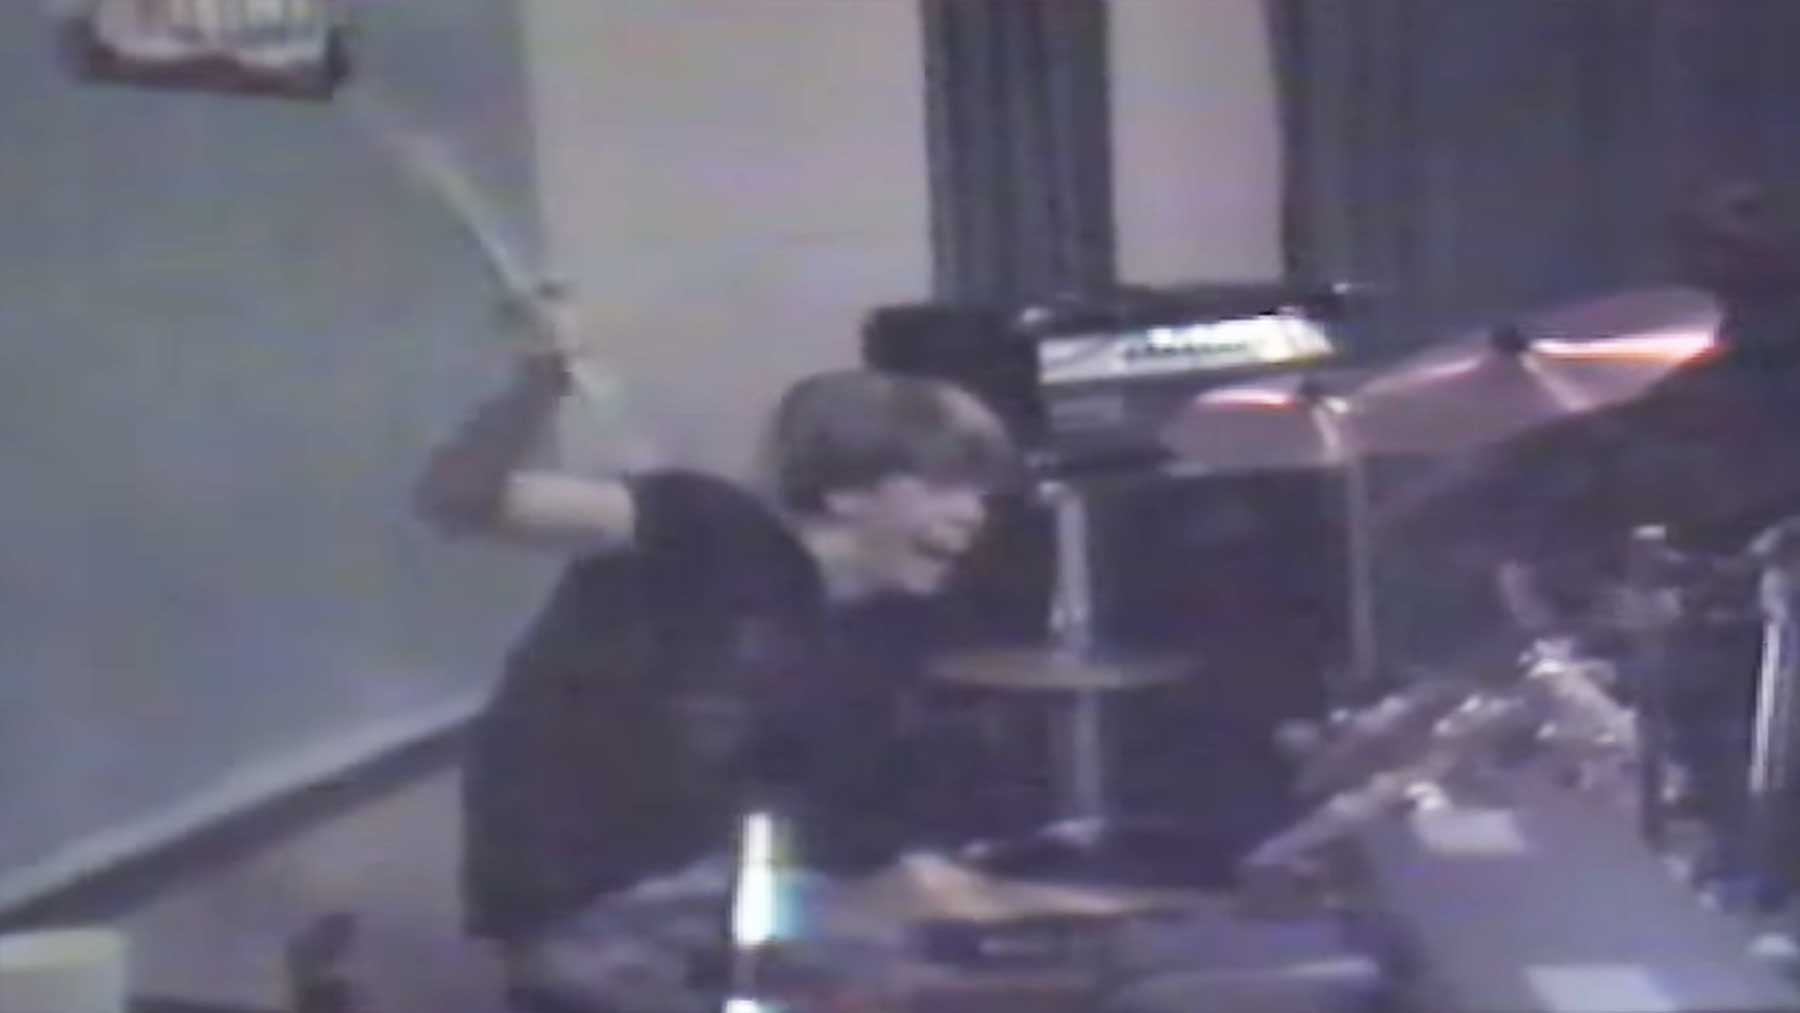 Dave Grohl spielt 1985 Schlagzeug in High School Band Mission Impossible